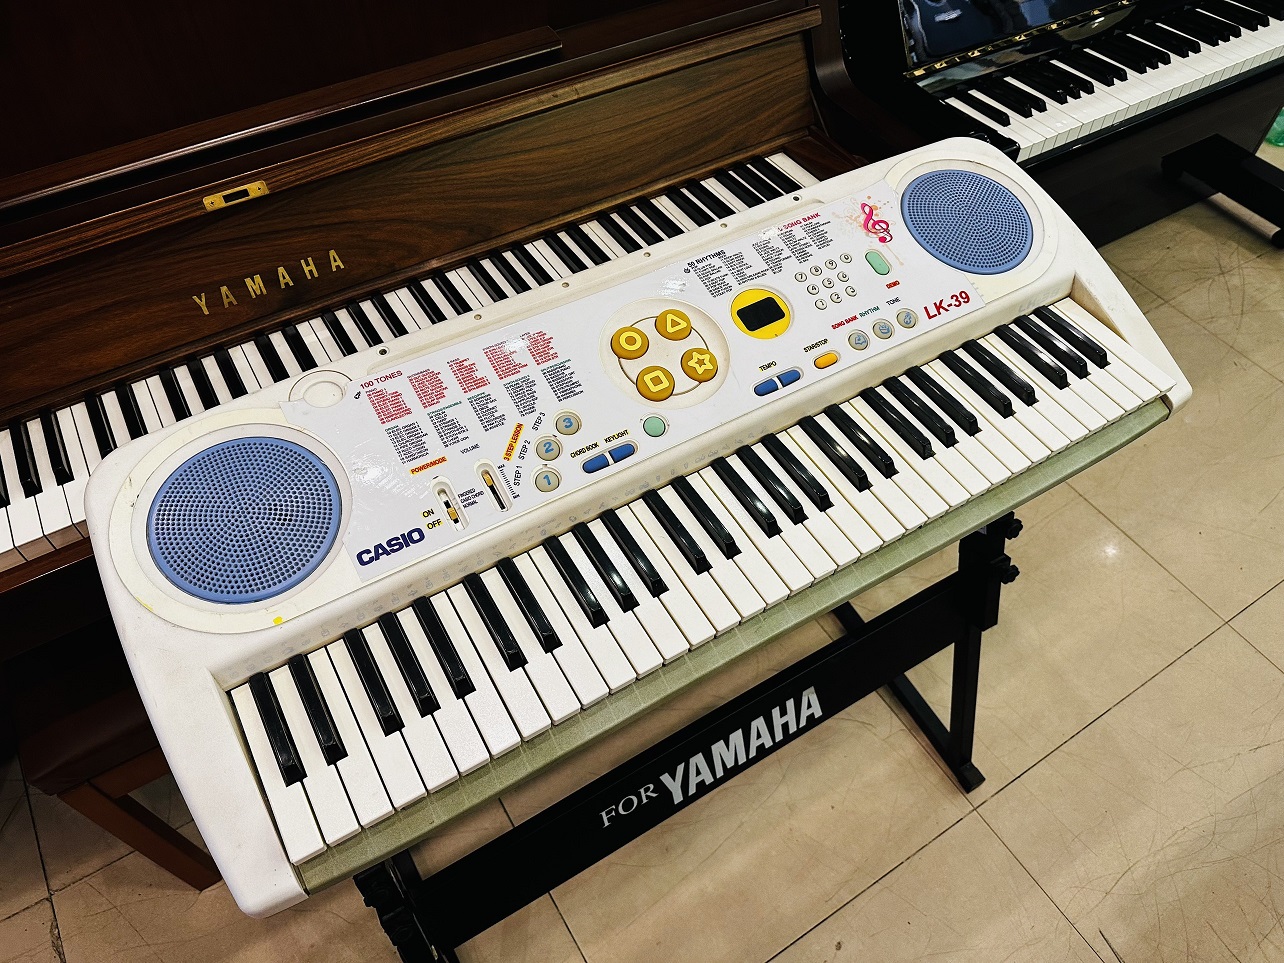 organ-casio-gia-re-thanh-ly-2